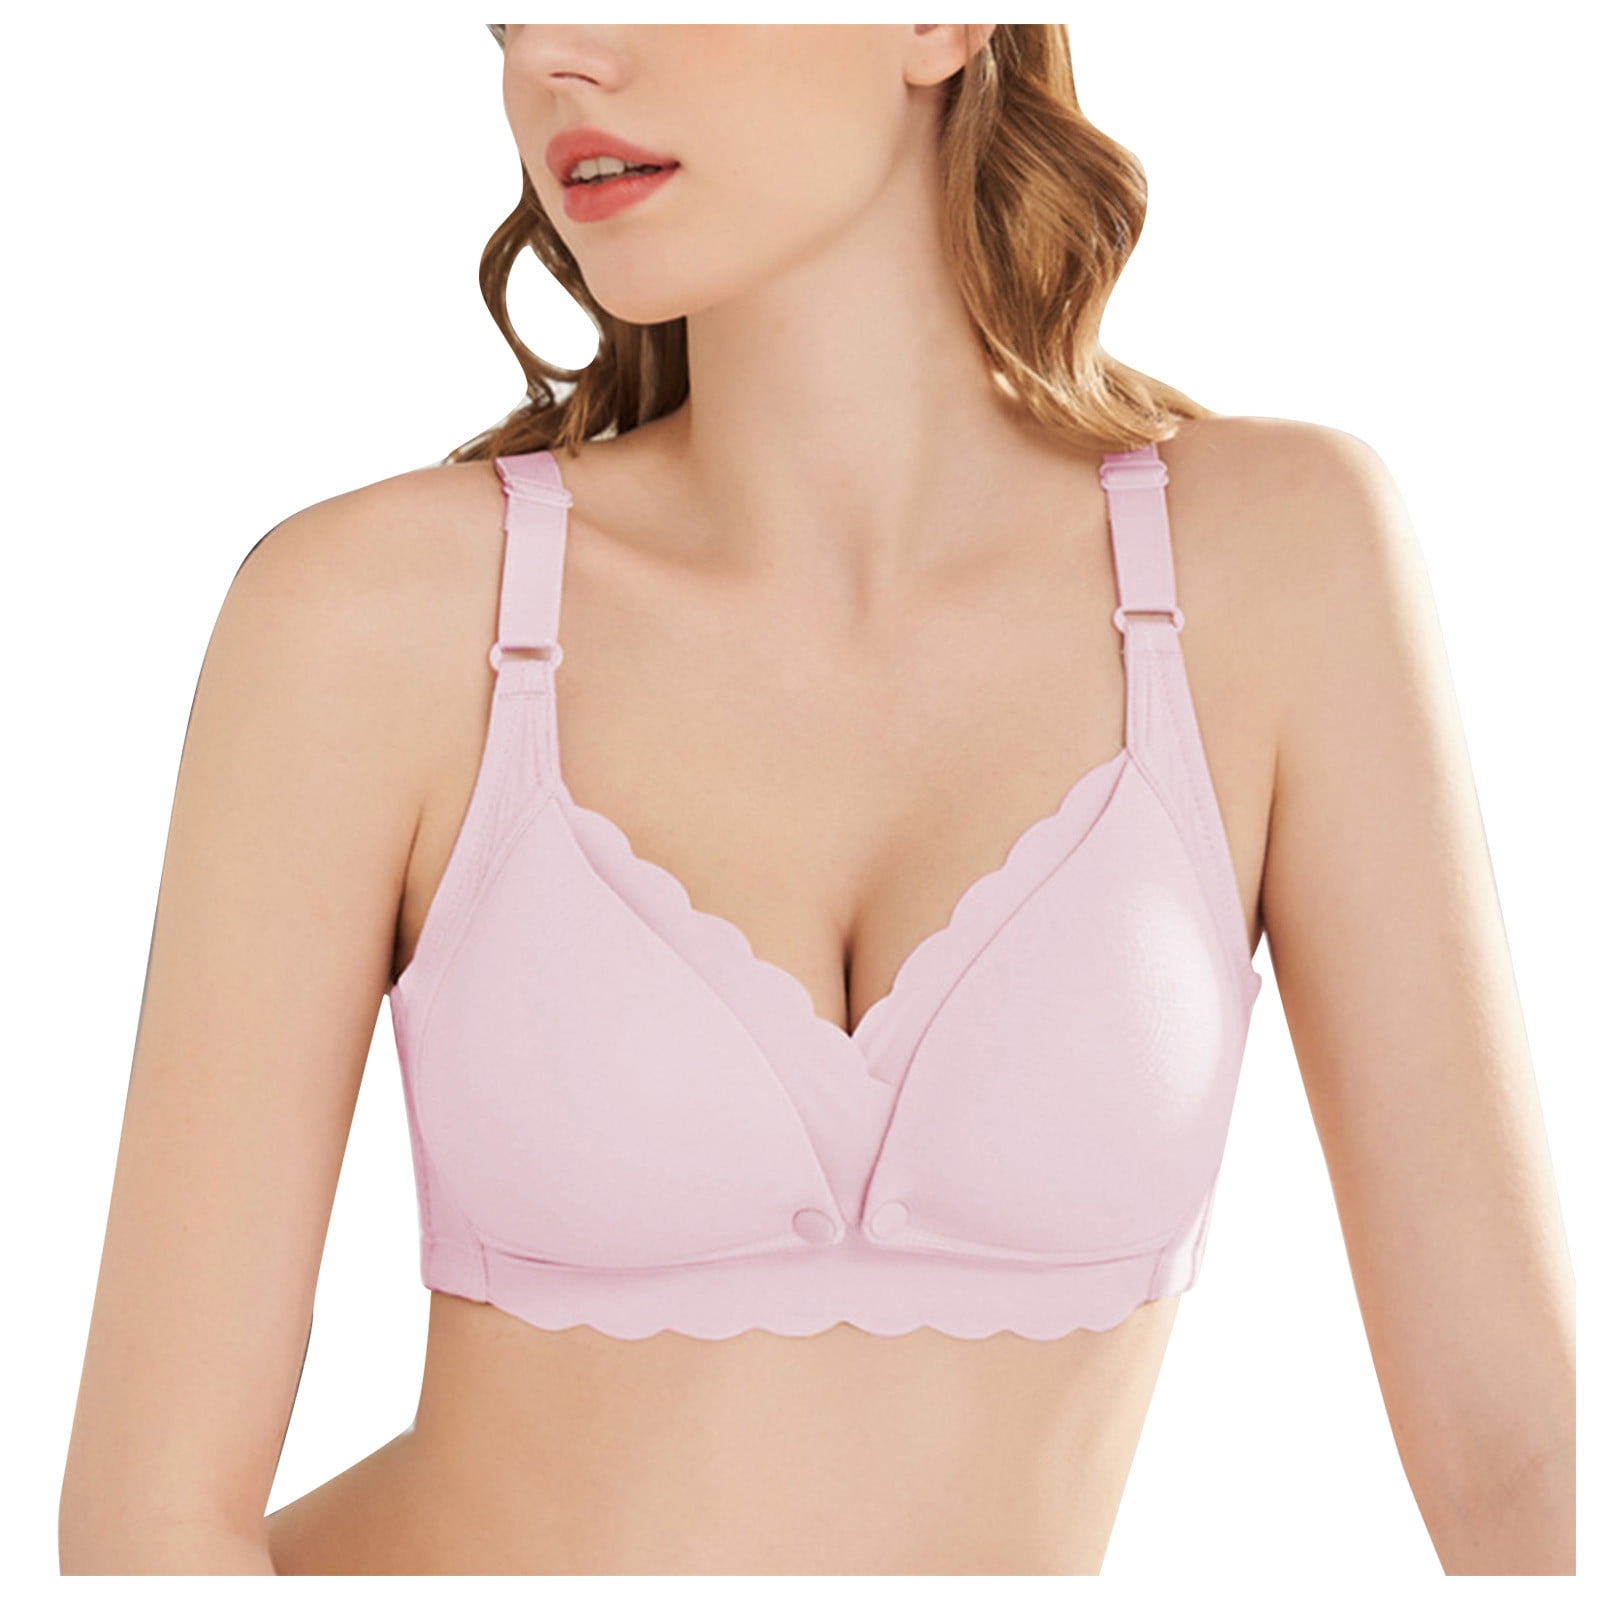 adviicd Under Outfit Bras for Women Women's Smoothing Seamless